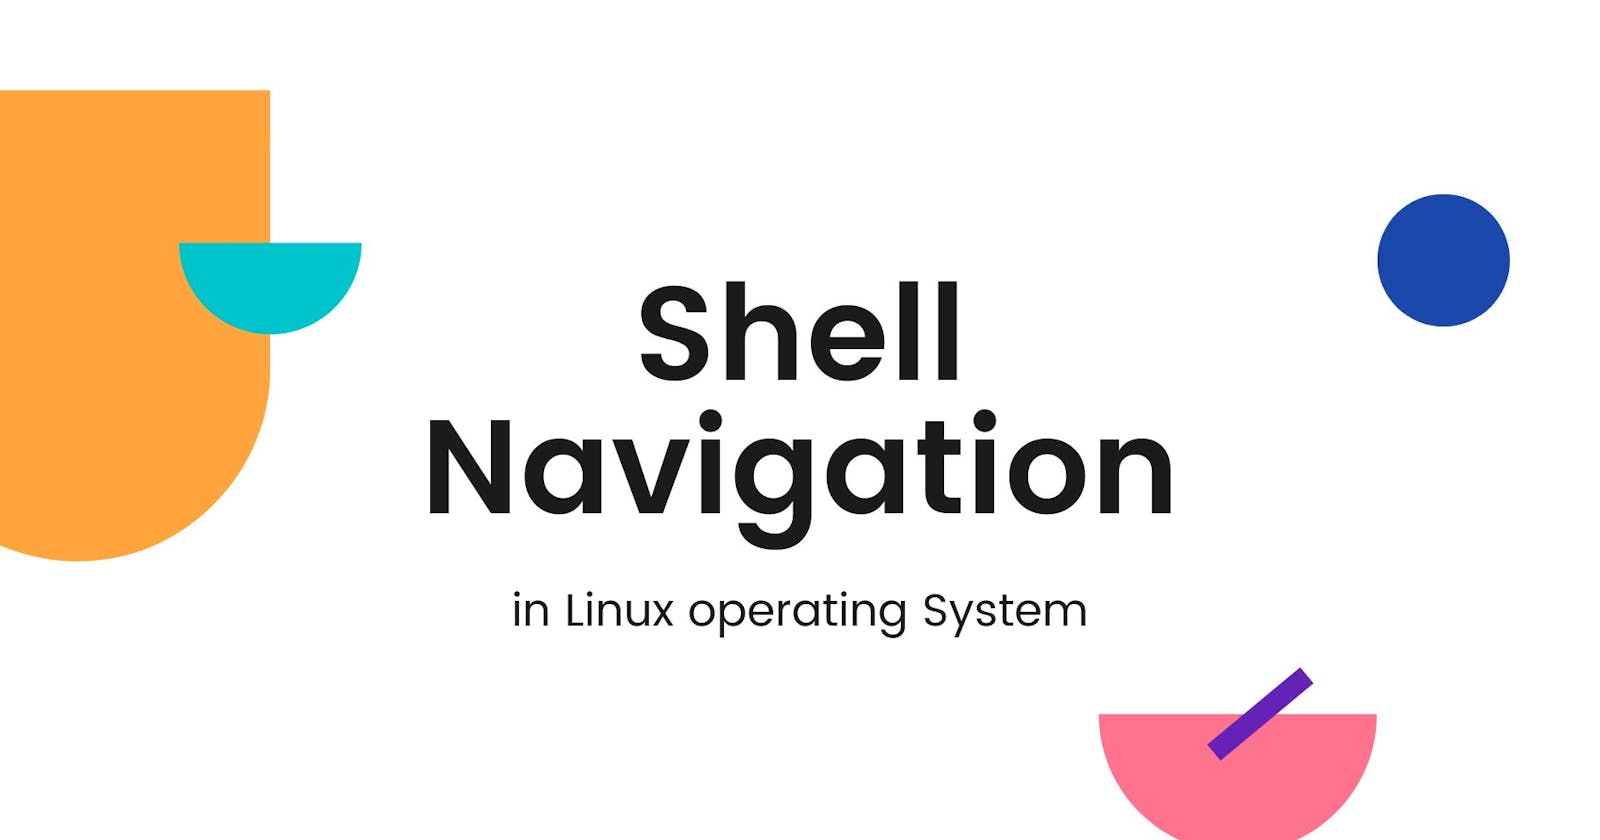 Shell Navigation in Linux Operating System